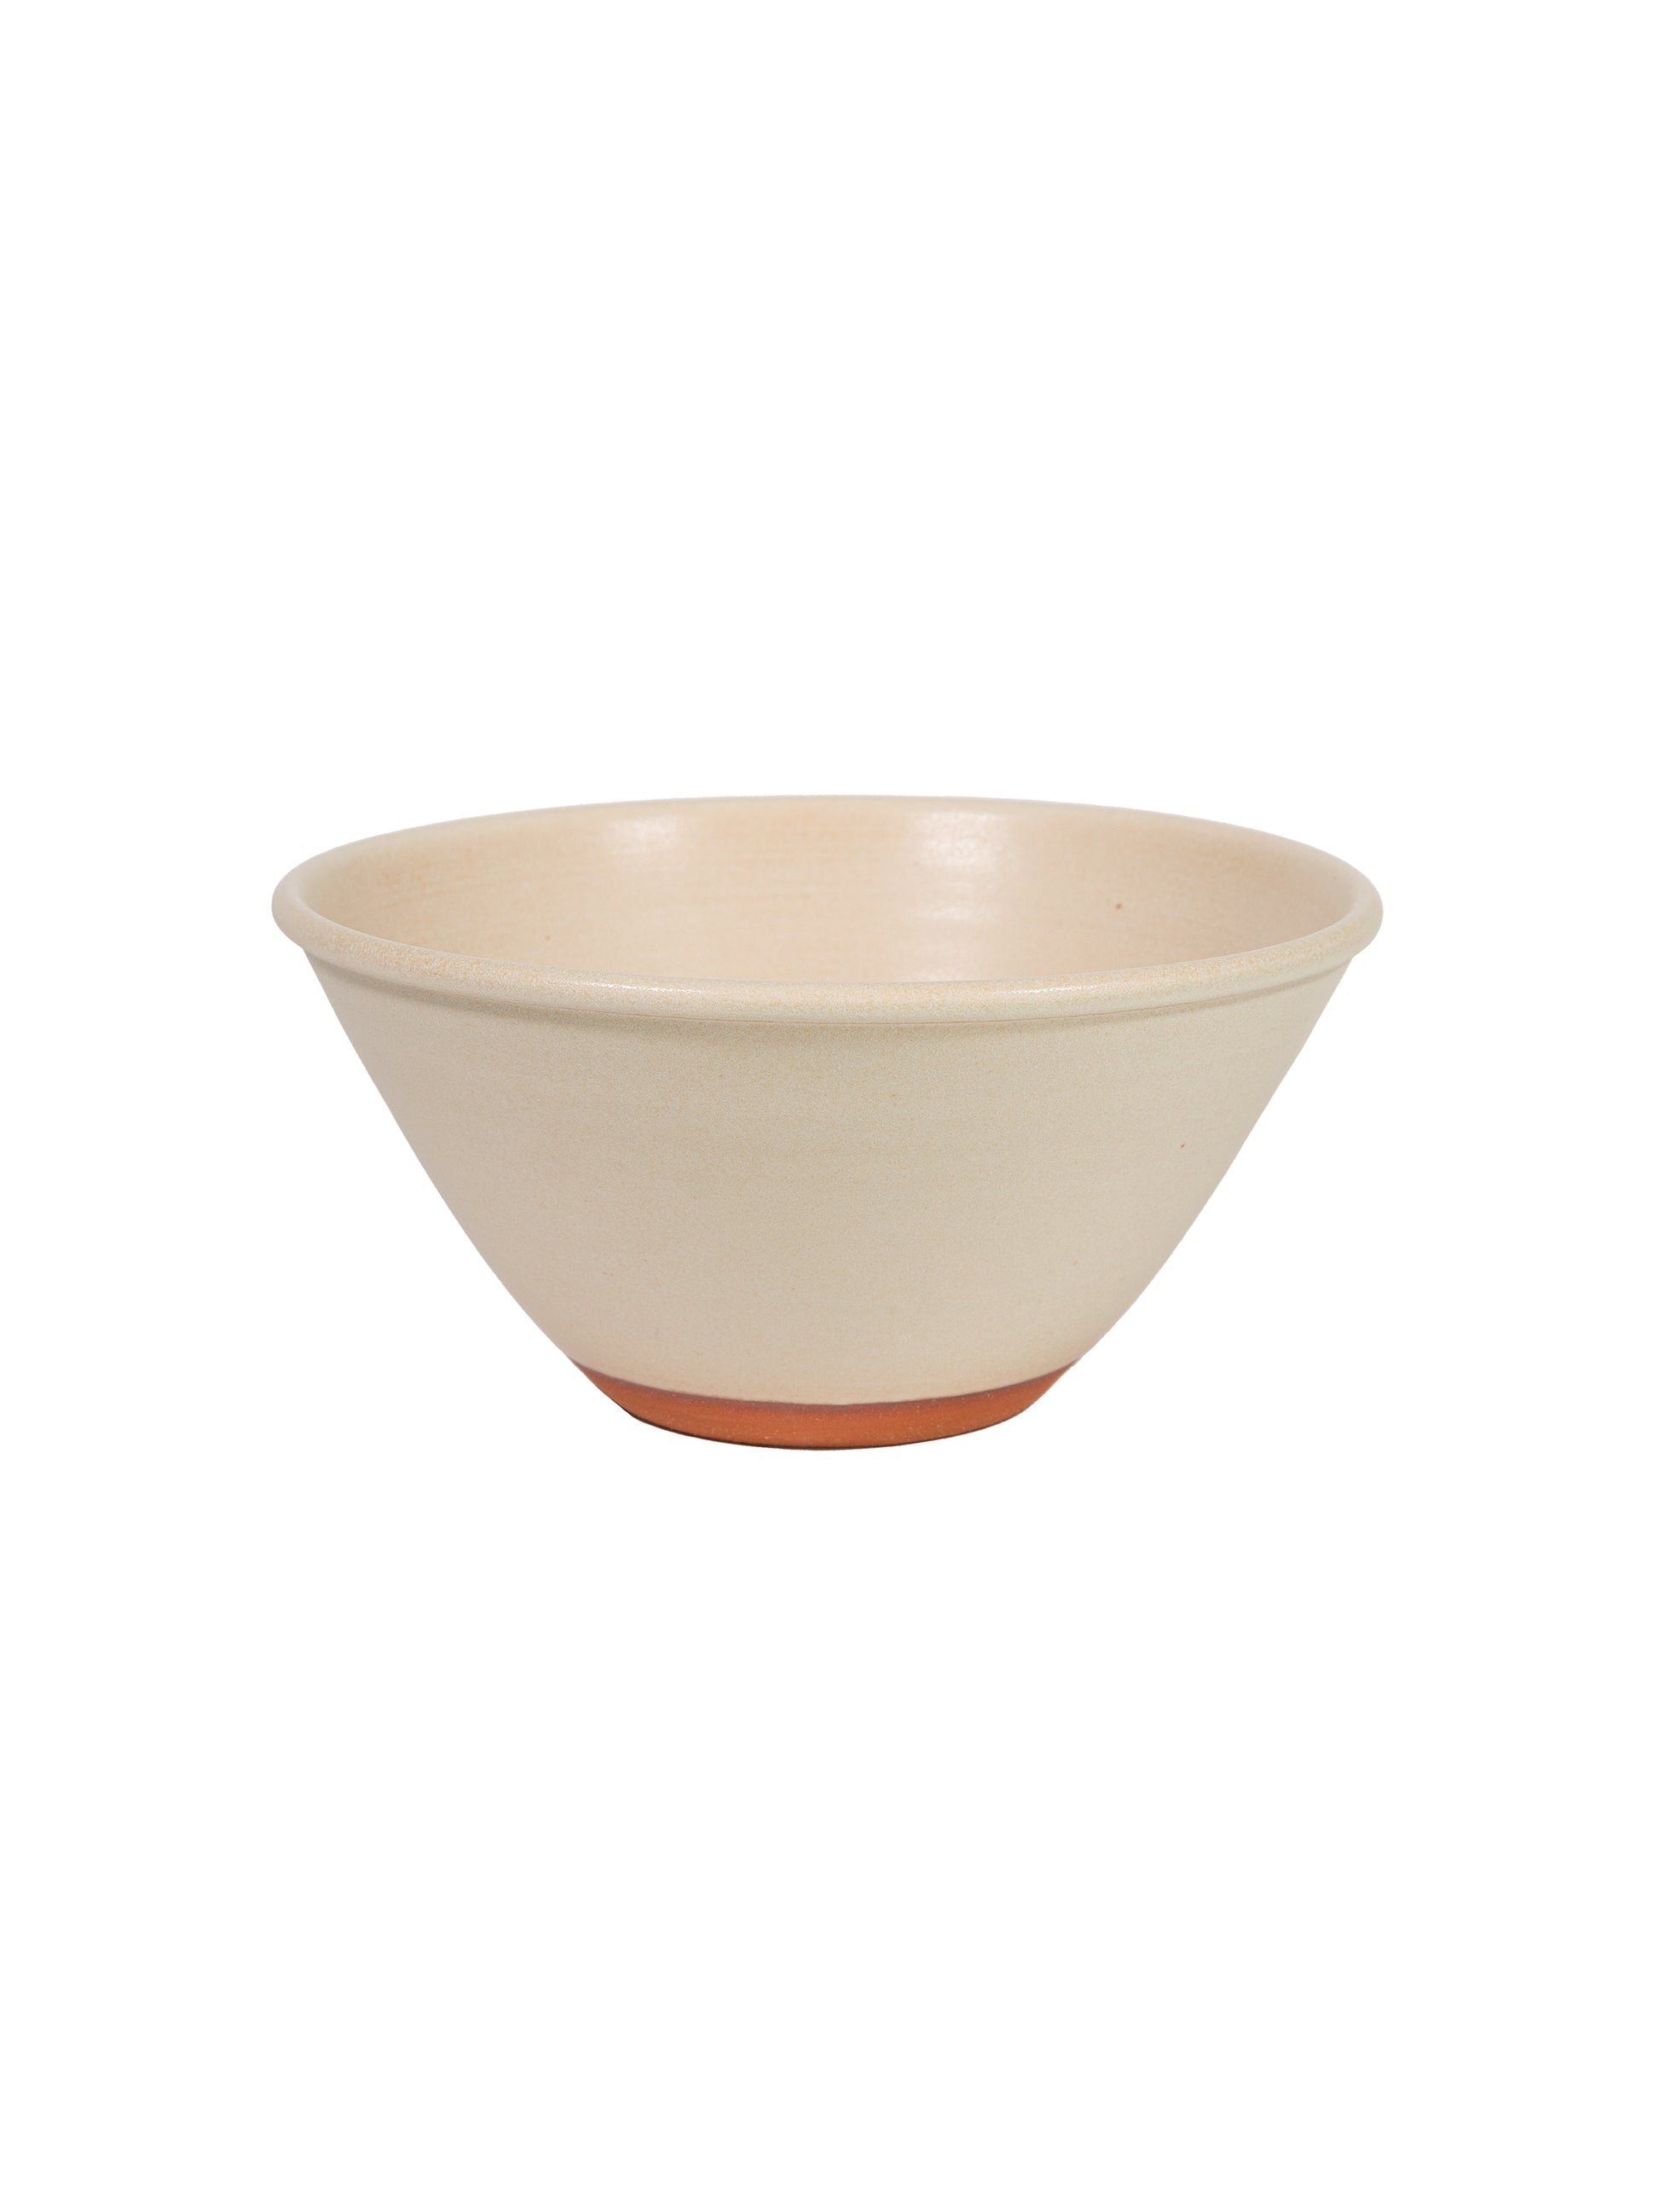 New York Stoneware Cereal Bowl Ivory Weston Table